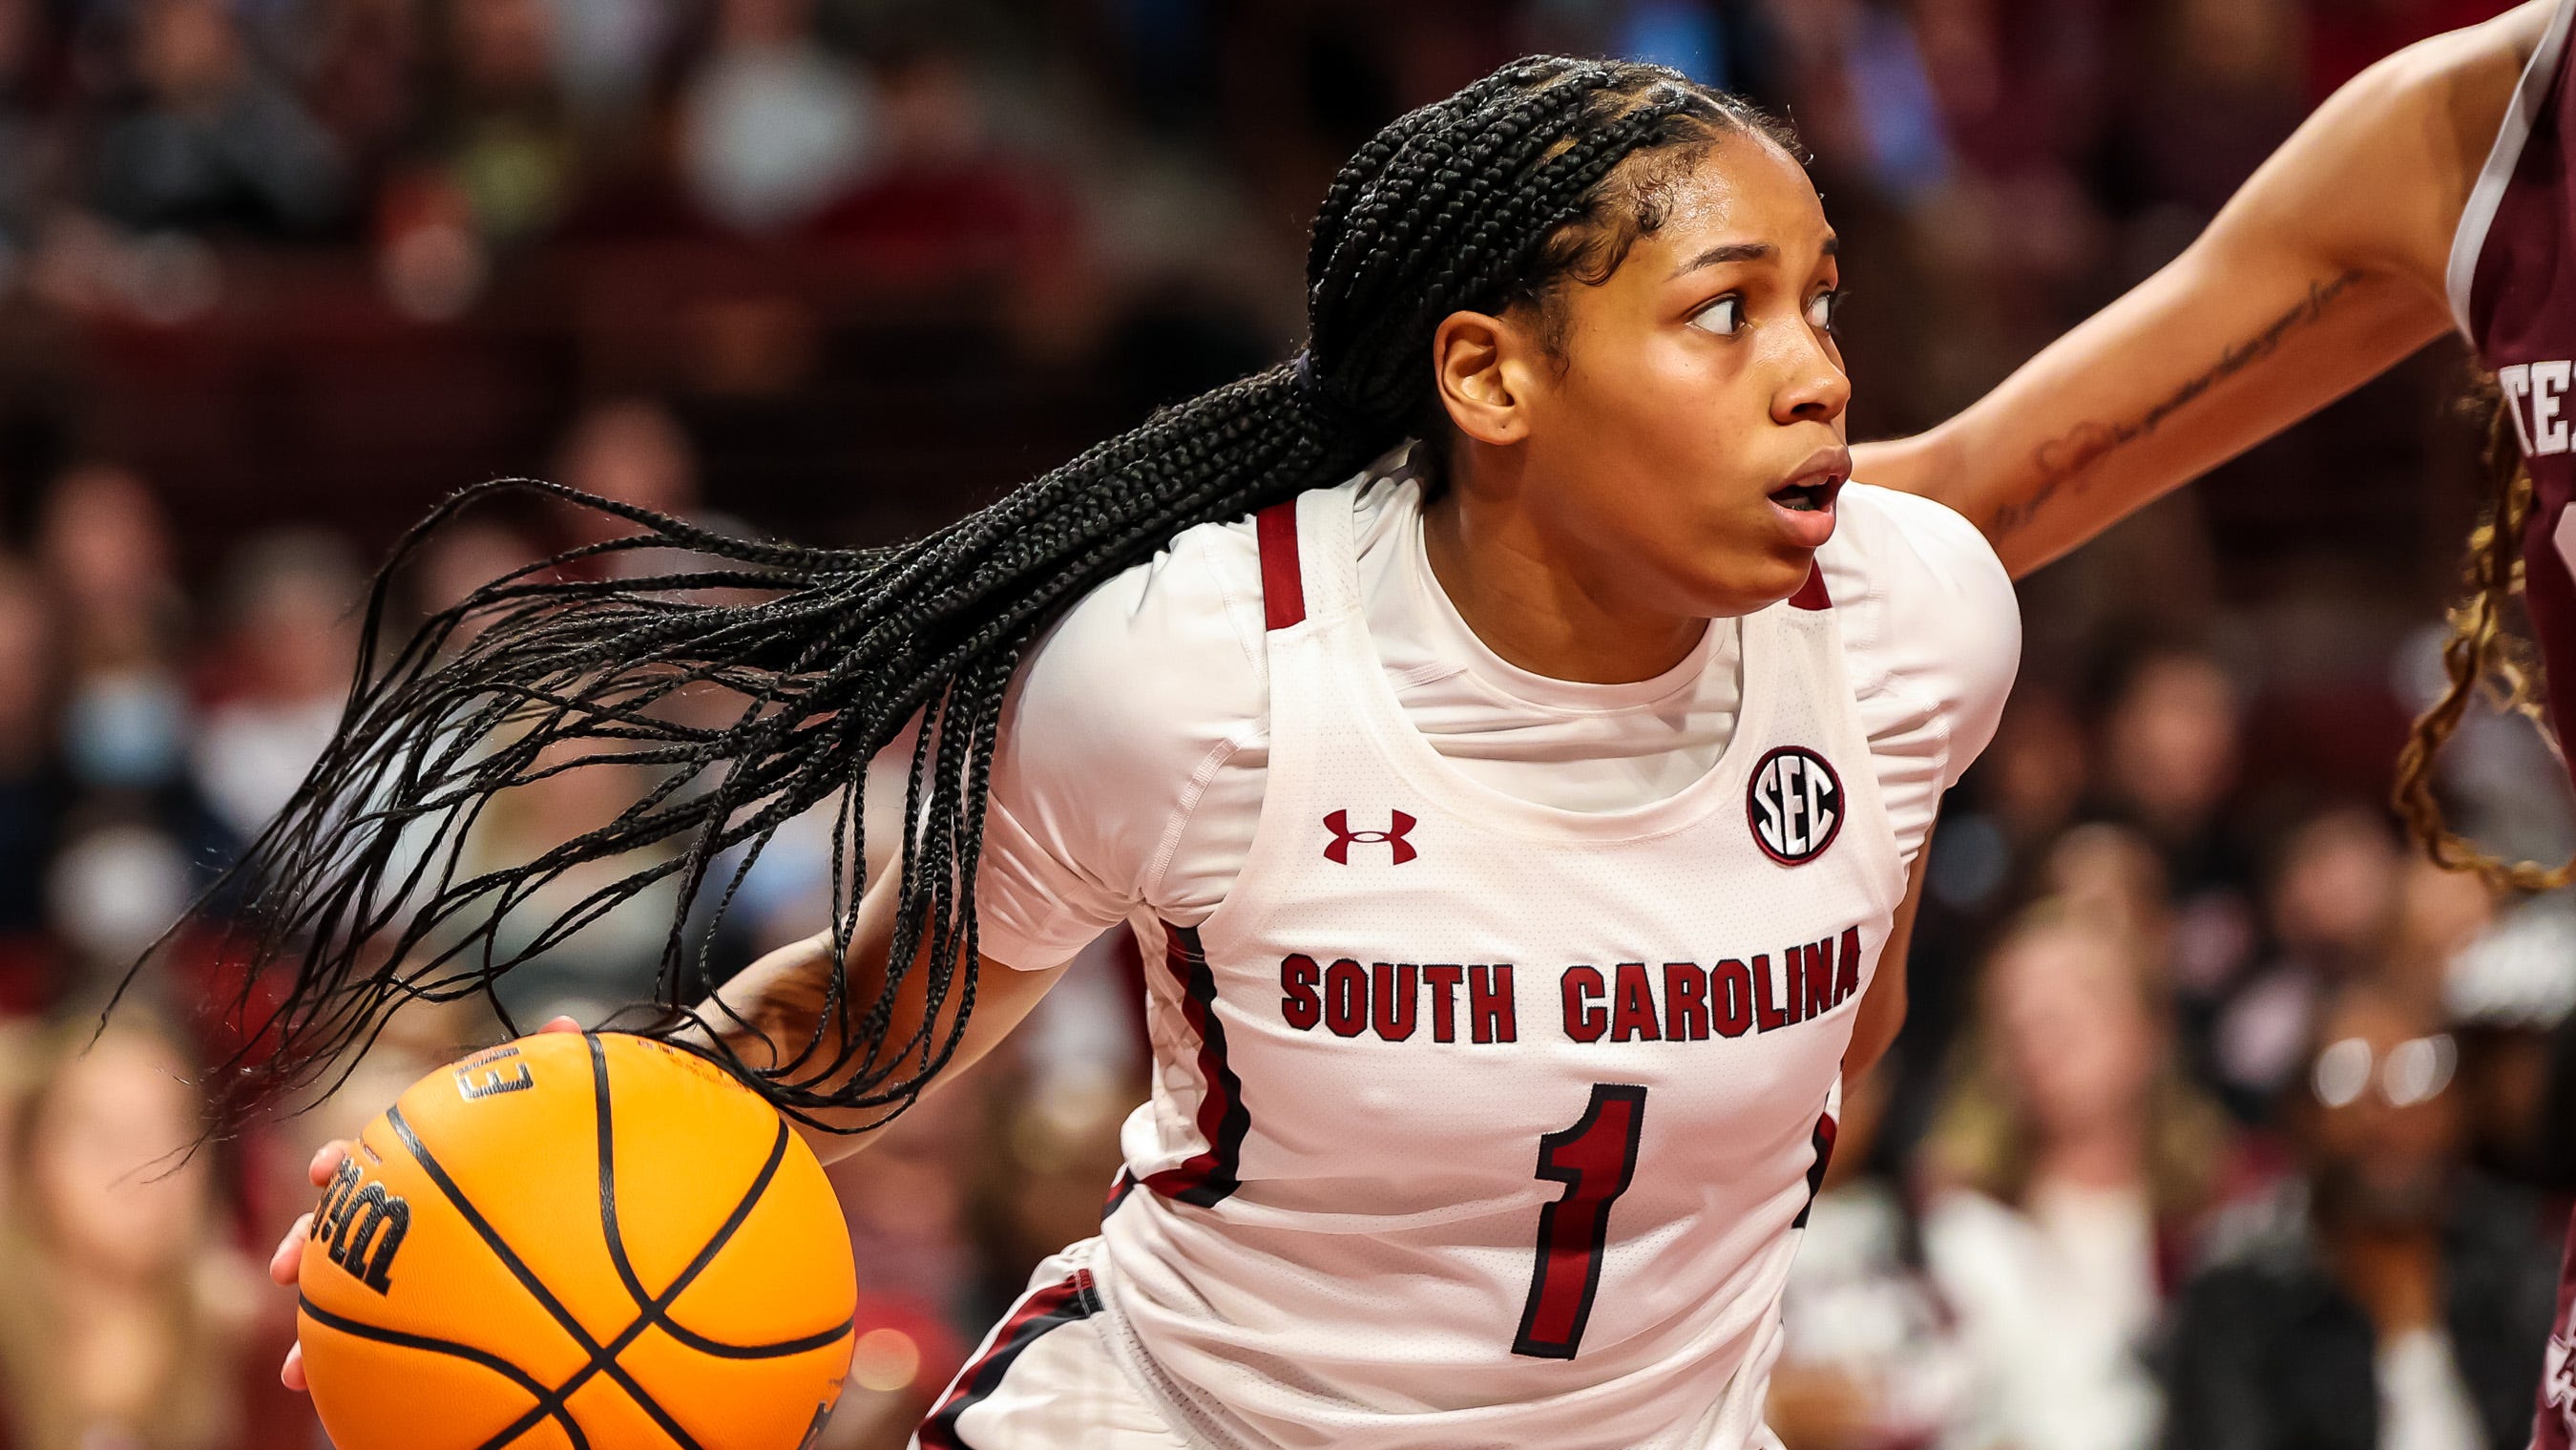 South Carolina women's basketball survives Georgia, wins 68-51 in first road SEC matchup